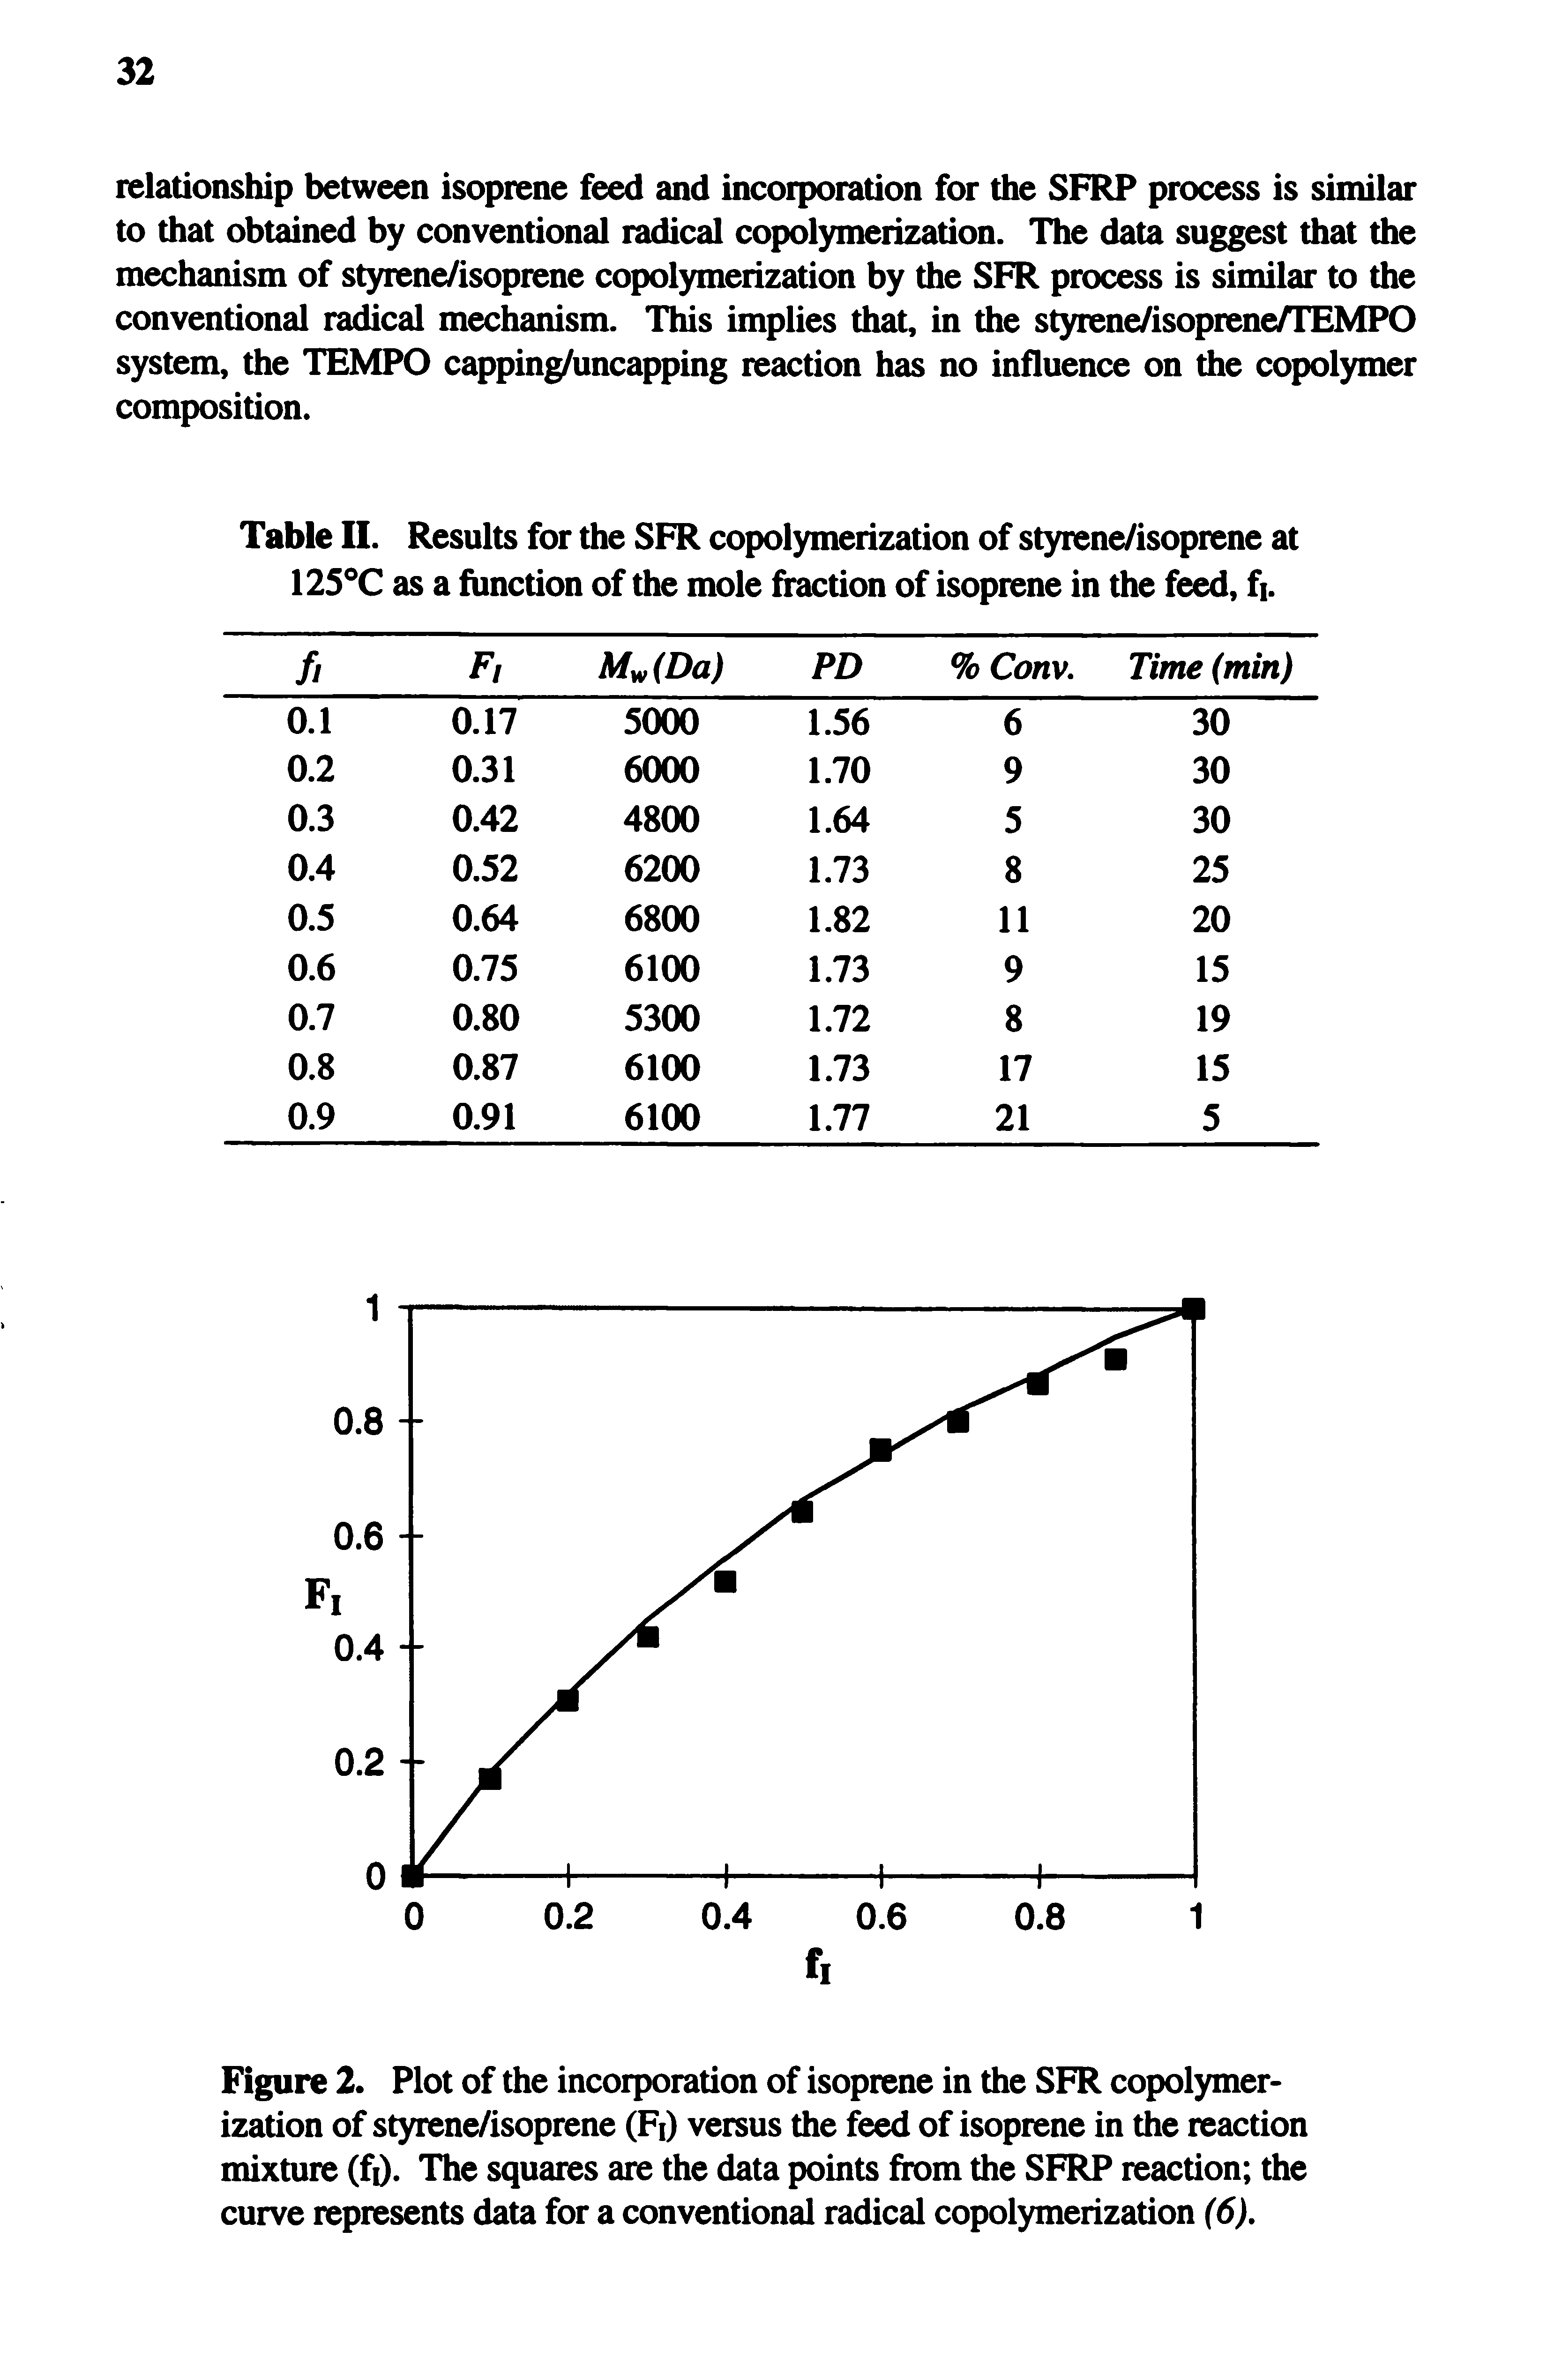 Figure 2. Plot of the incorporation of isoprene in the SFR copolymerization of styrene/isoprene (Fi) versus the feed of isoprene in the reaction mixture (fi). The squares are the data points from the SFRP reaction the curve represents data for a conventional radical copolymerization (6),...